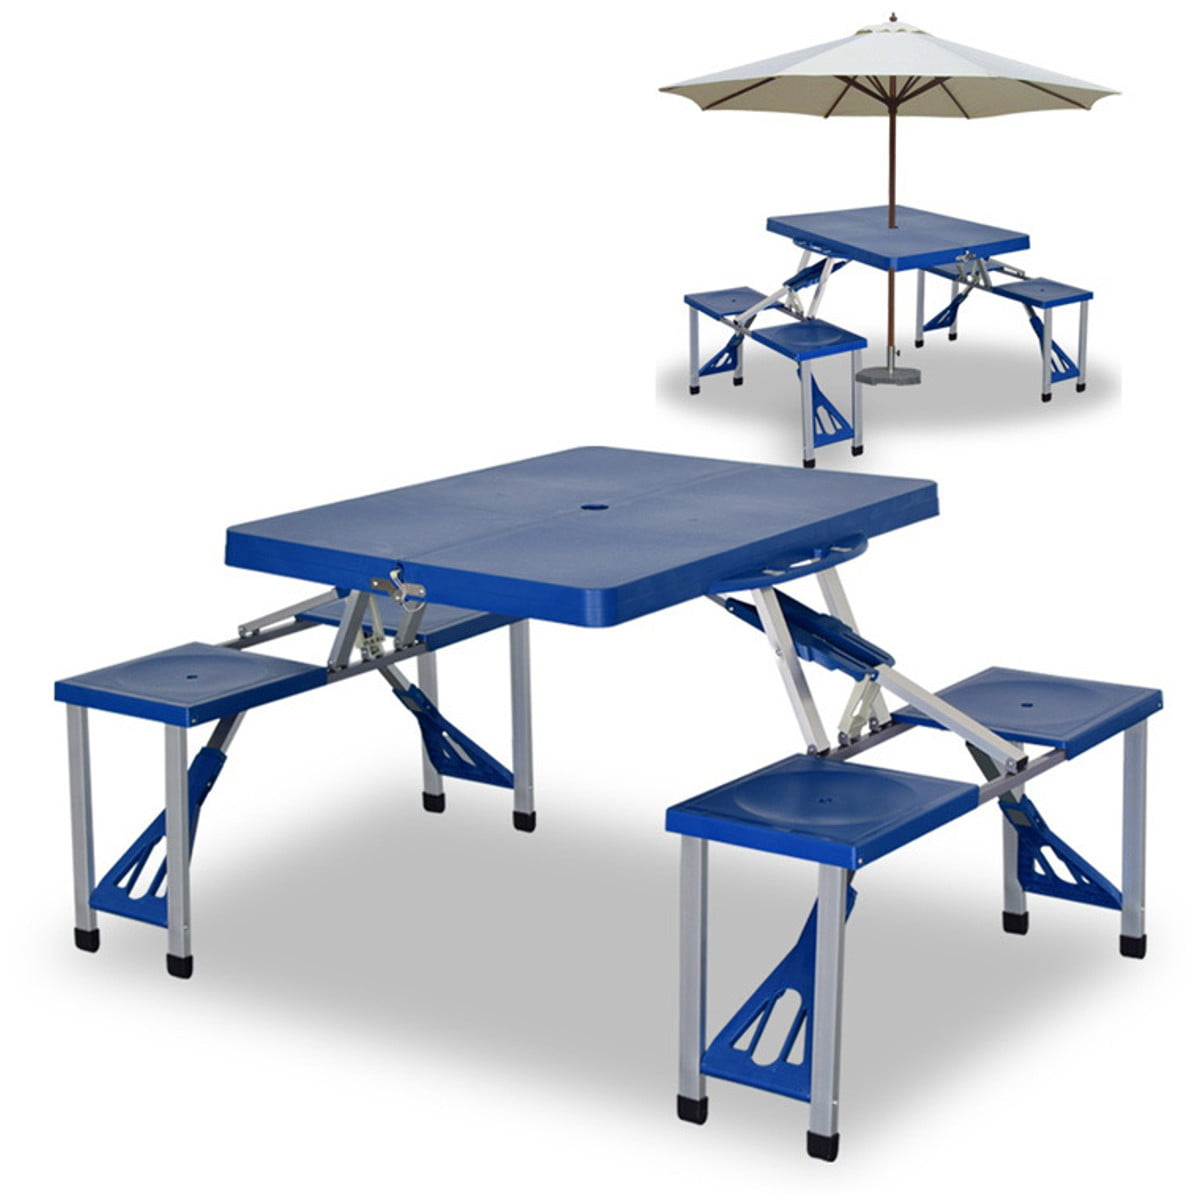 Outdoor Folding Camping Table, with 4 People Chair Umbrella Hole